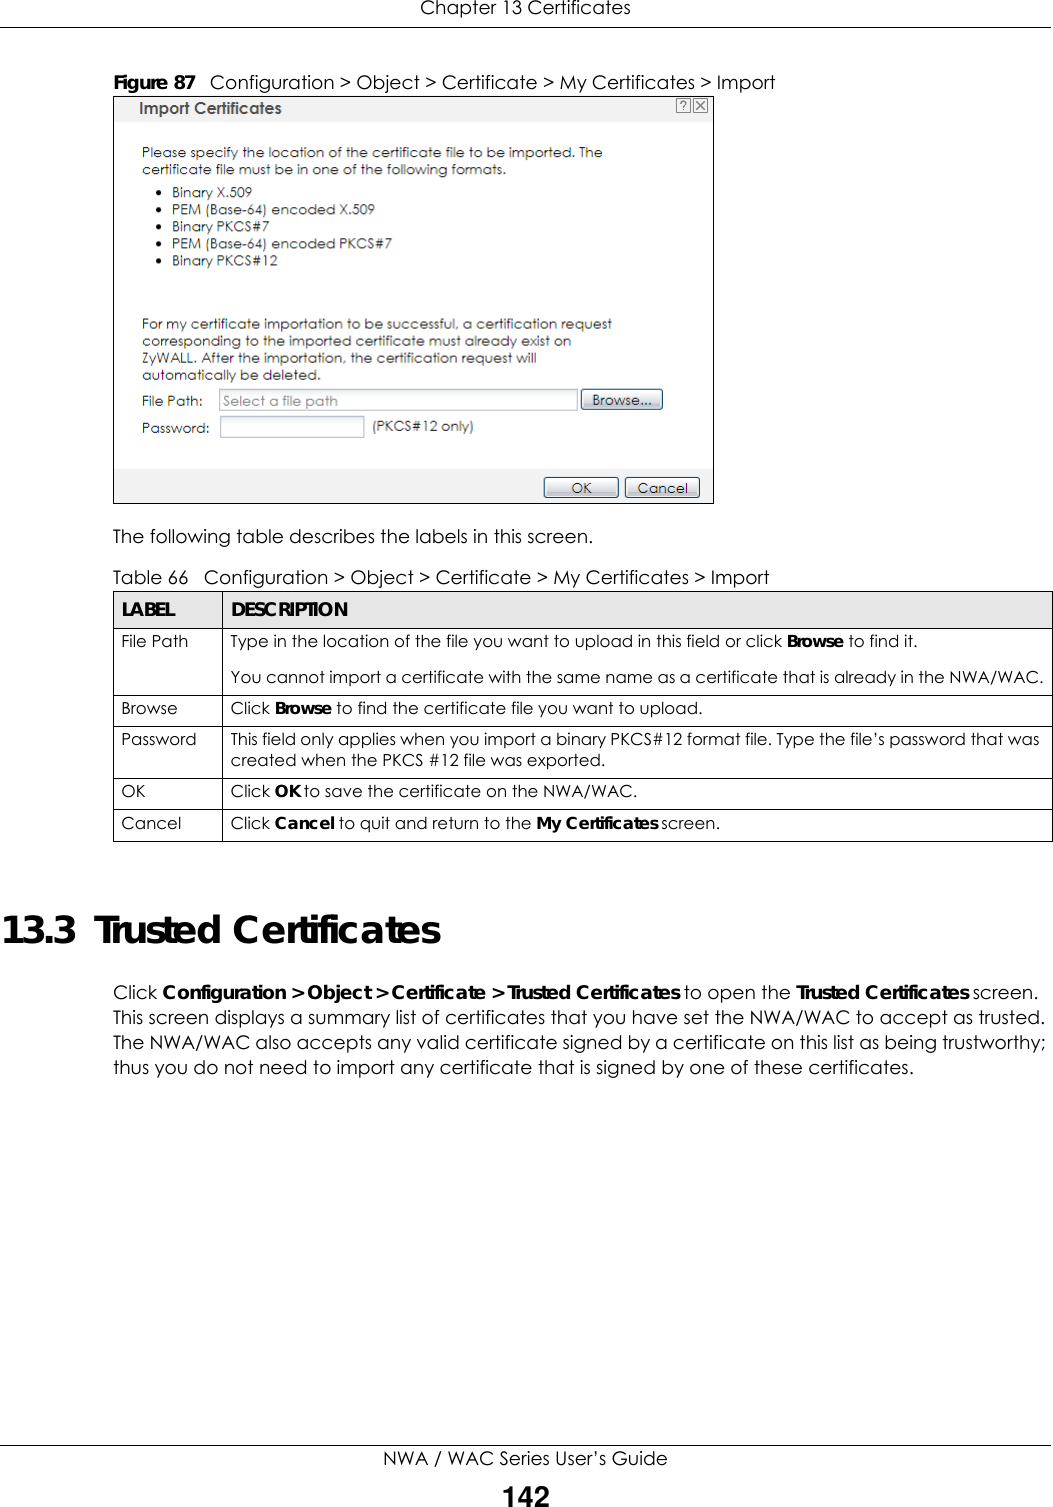 Chapter 13 CertificatesNWA / WAC Series User’s Guide142Figure 87   Configuration &gt; Object &gt; Certificate &gt; My Certificates &gt; ImportThe following table describes the labels in this screen.  13.3  Trusted CertificatesClick Configuration &gt; Object &gt; Certificate &gt; Trusted Certificates to open the Trusted Certificates screen. This screen displays a summary list of certificates that you have set the NWA/WAC to accept as trusted. The NWA/WAC also accepts any valid certificate signed by a certificate on this list as being trustworthy; thus you do not need to import any certificate that is signed by one of these certificates. Table 66   Configuration &gt; Object &gt; Certificate &gt; My Certificates &gt; ImportLABEL DESCRIPTIONFile Path  Type in the location of the file you want to upload in this field or click Browse to find it.You cannot import a certificate with the same name as a certificate that is already in the NWA/WAC.Browse Click Browse to find the certificate file you want to upload. Password This field only applies when you import a binary PKCS#12 format file. Type the file’s password that was created when the PKCS #12 file was exported. OK Click OK to save the certificate on the NWA/WAC.Cancel Click Cancel to quit and return to the My Certificates screen.